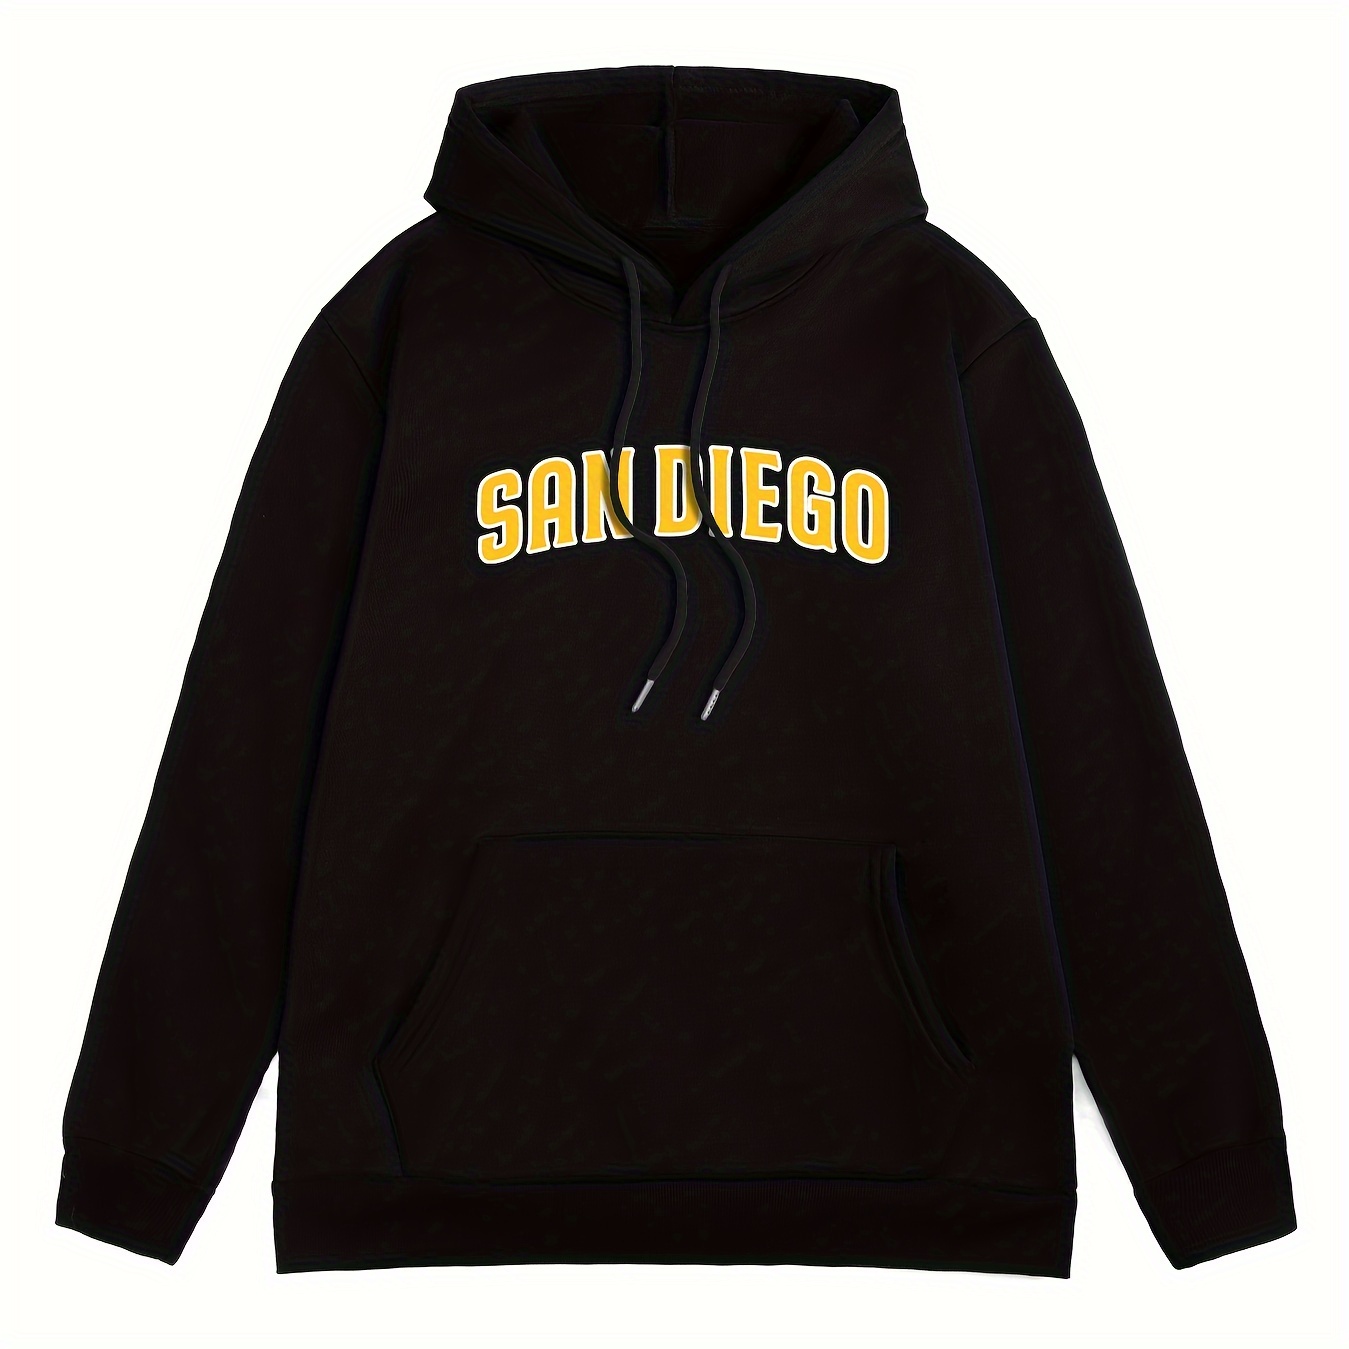 

Yellow San Diego Print Hoodie, Cool Sweatshirt For Men, Men's Casual Hooded Pullover Streetwear Clothing For Spring Fall Winter, As Gifts